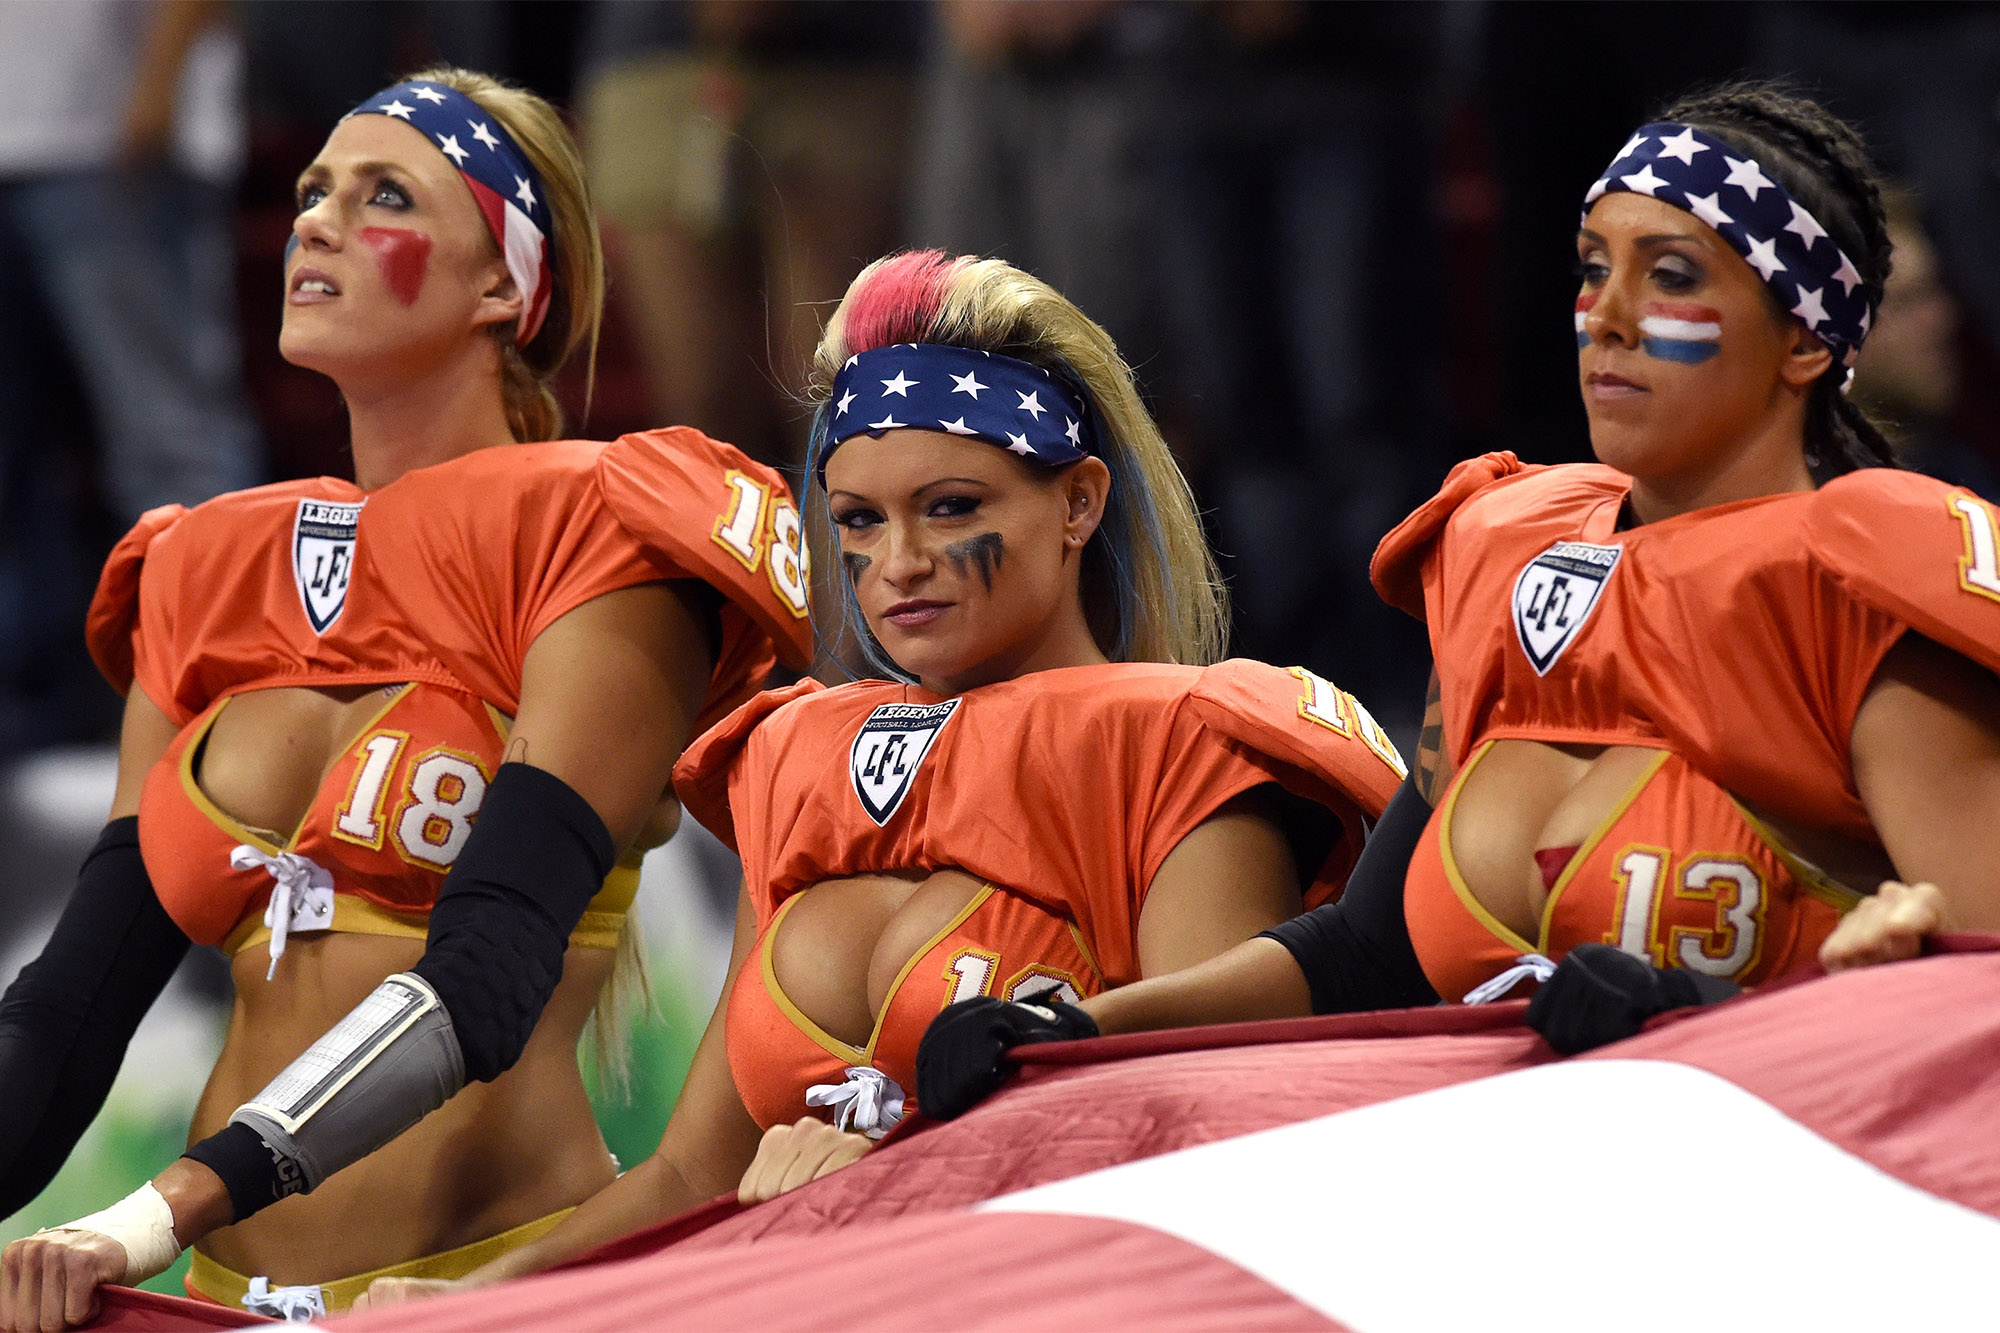 chris dix recommends Lingerie Football League Wardrobe Malfunctions